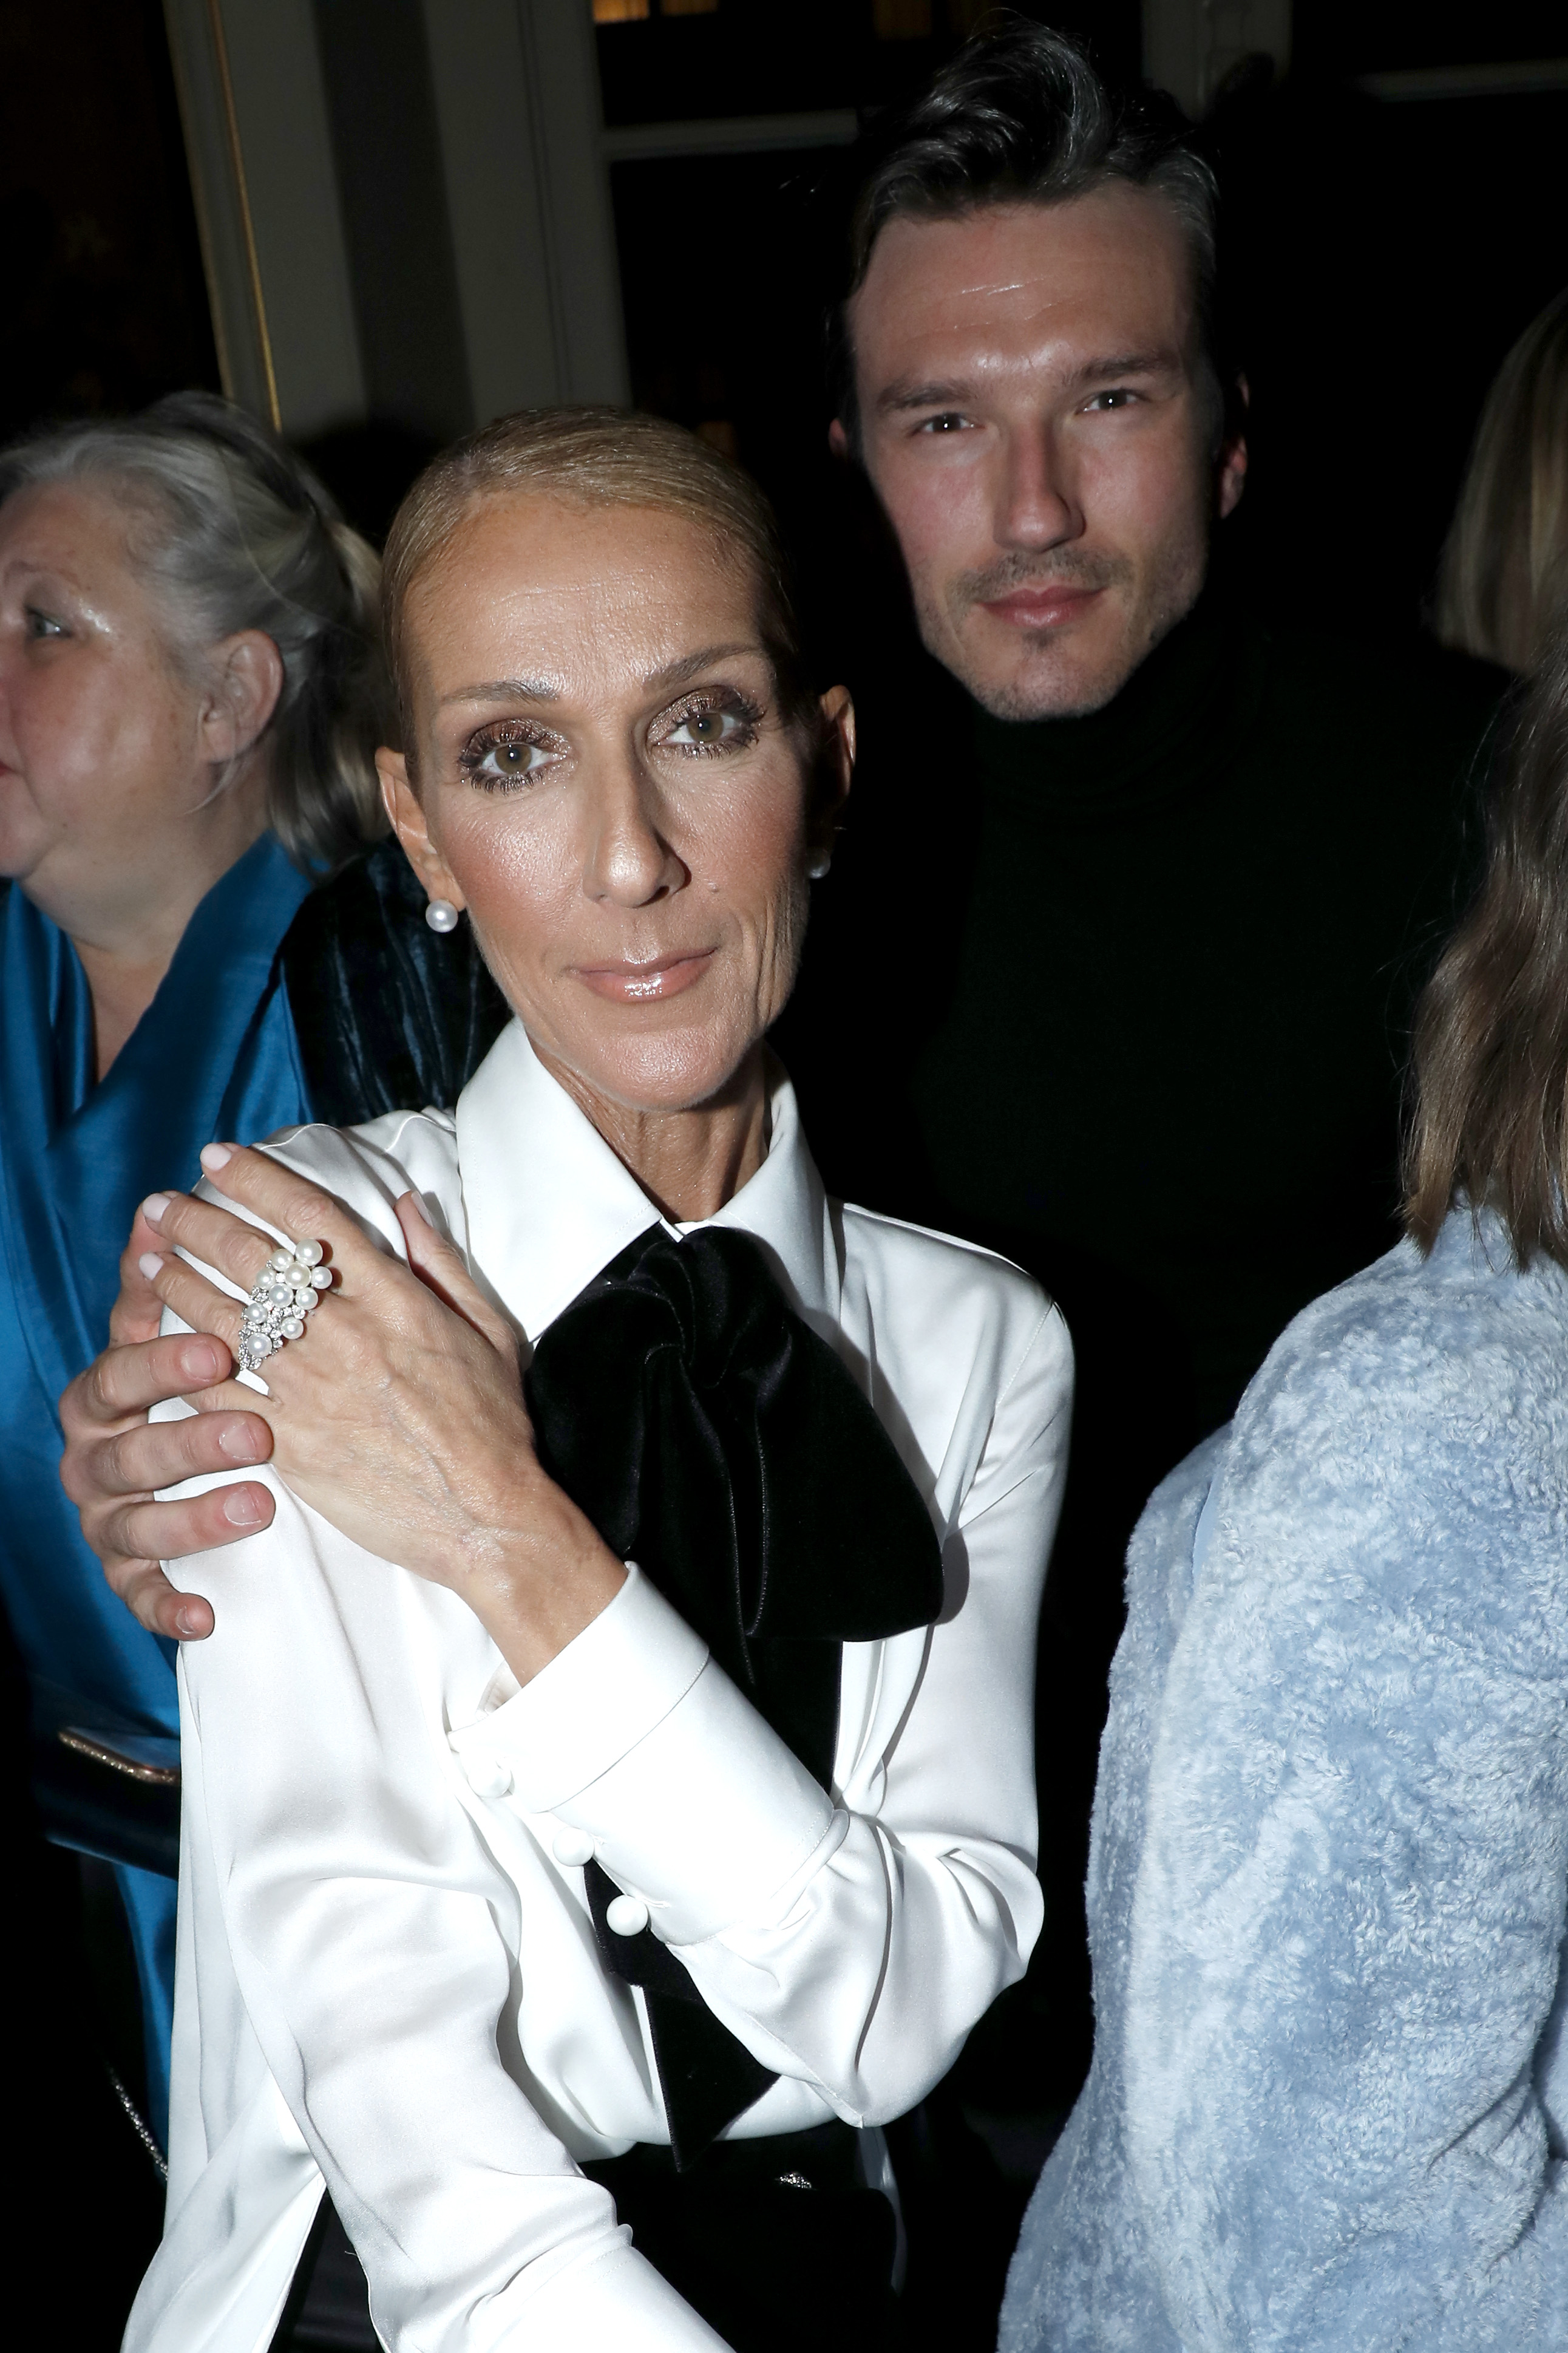 Celine Dion and Pepe Munoz attend the Giorgio Armani Prive Haute Couture Spring Summer 2019 show as part of Paris Fashion Week on January 22, 2019 in Paris, France. | Source: Getty Images